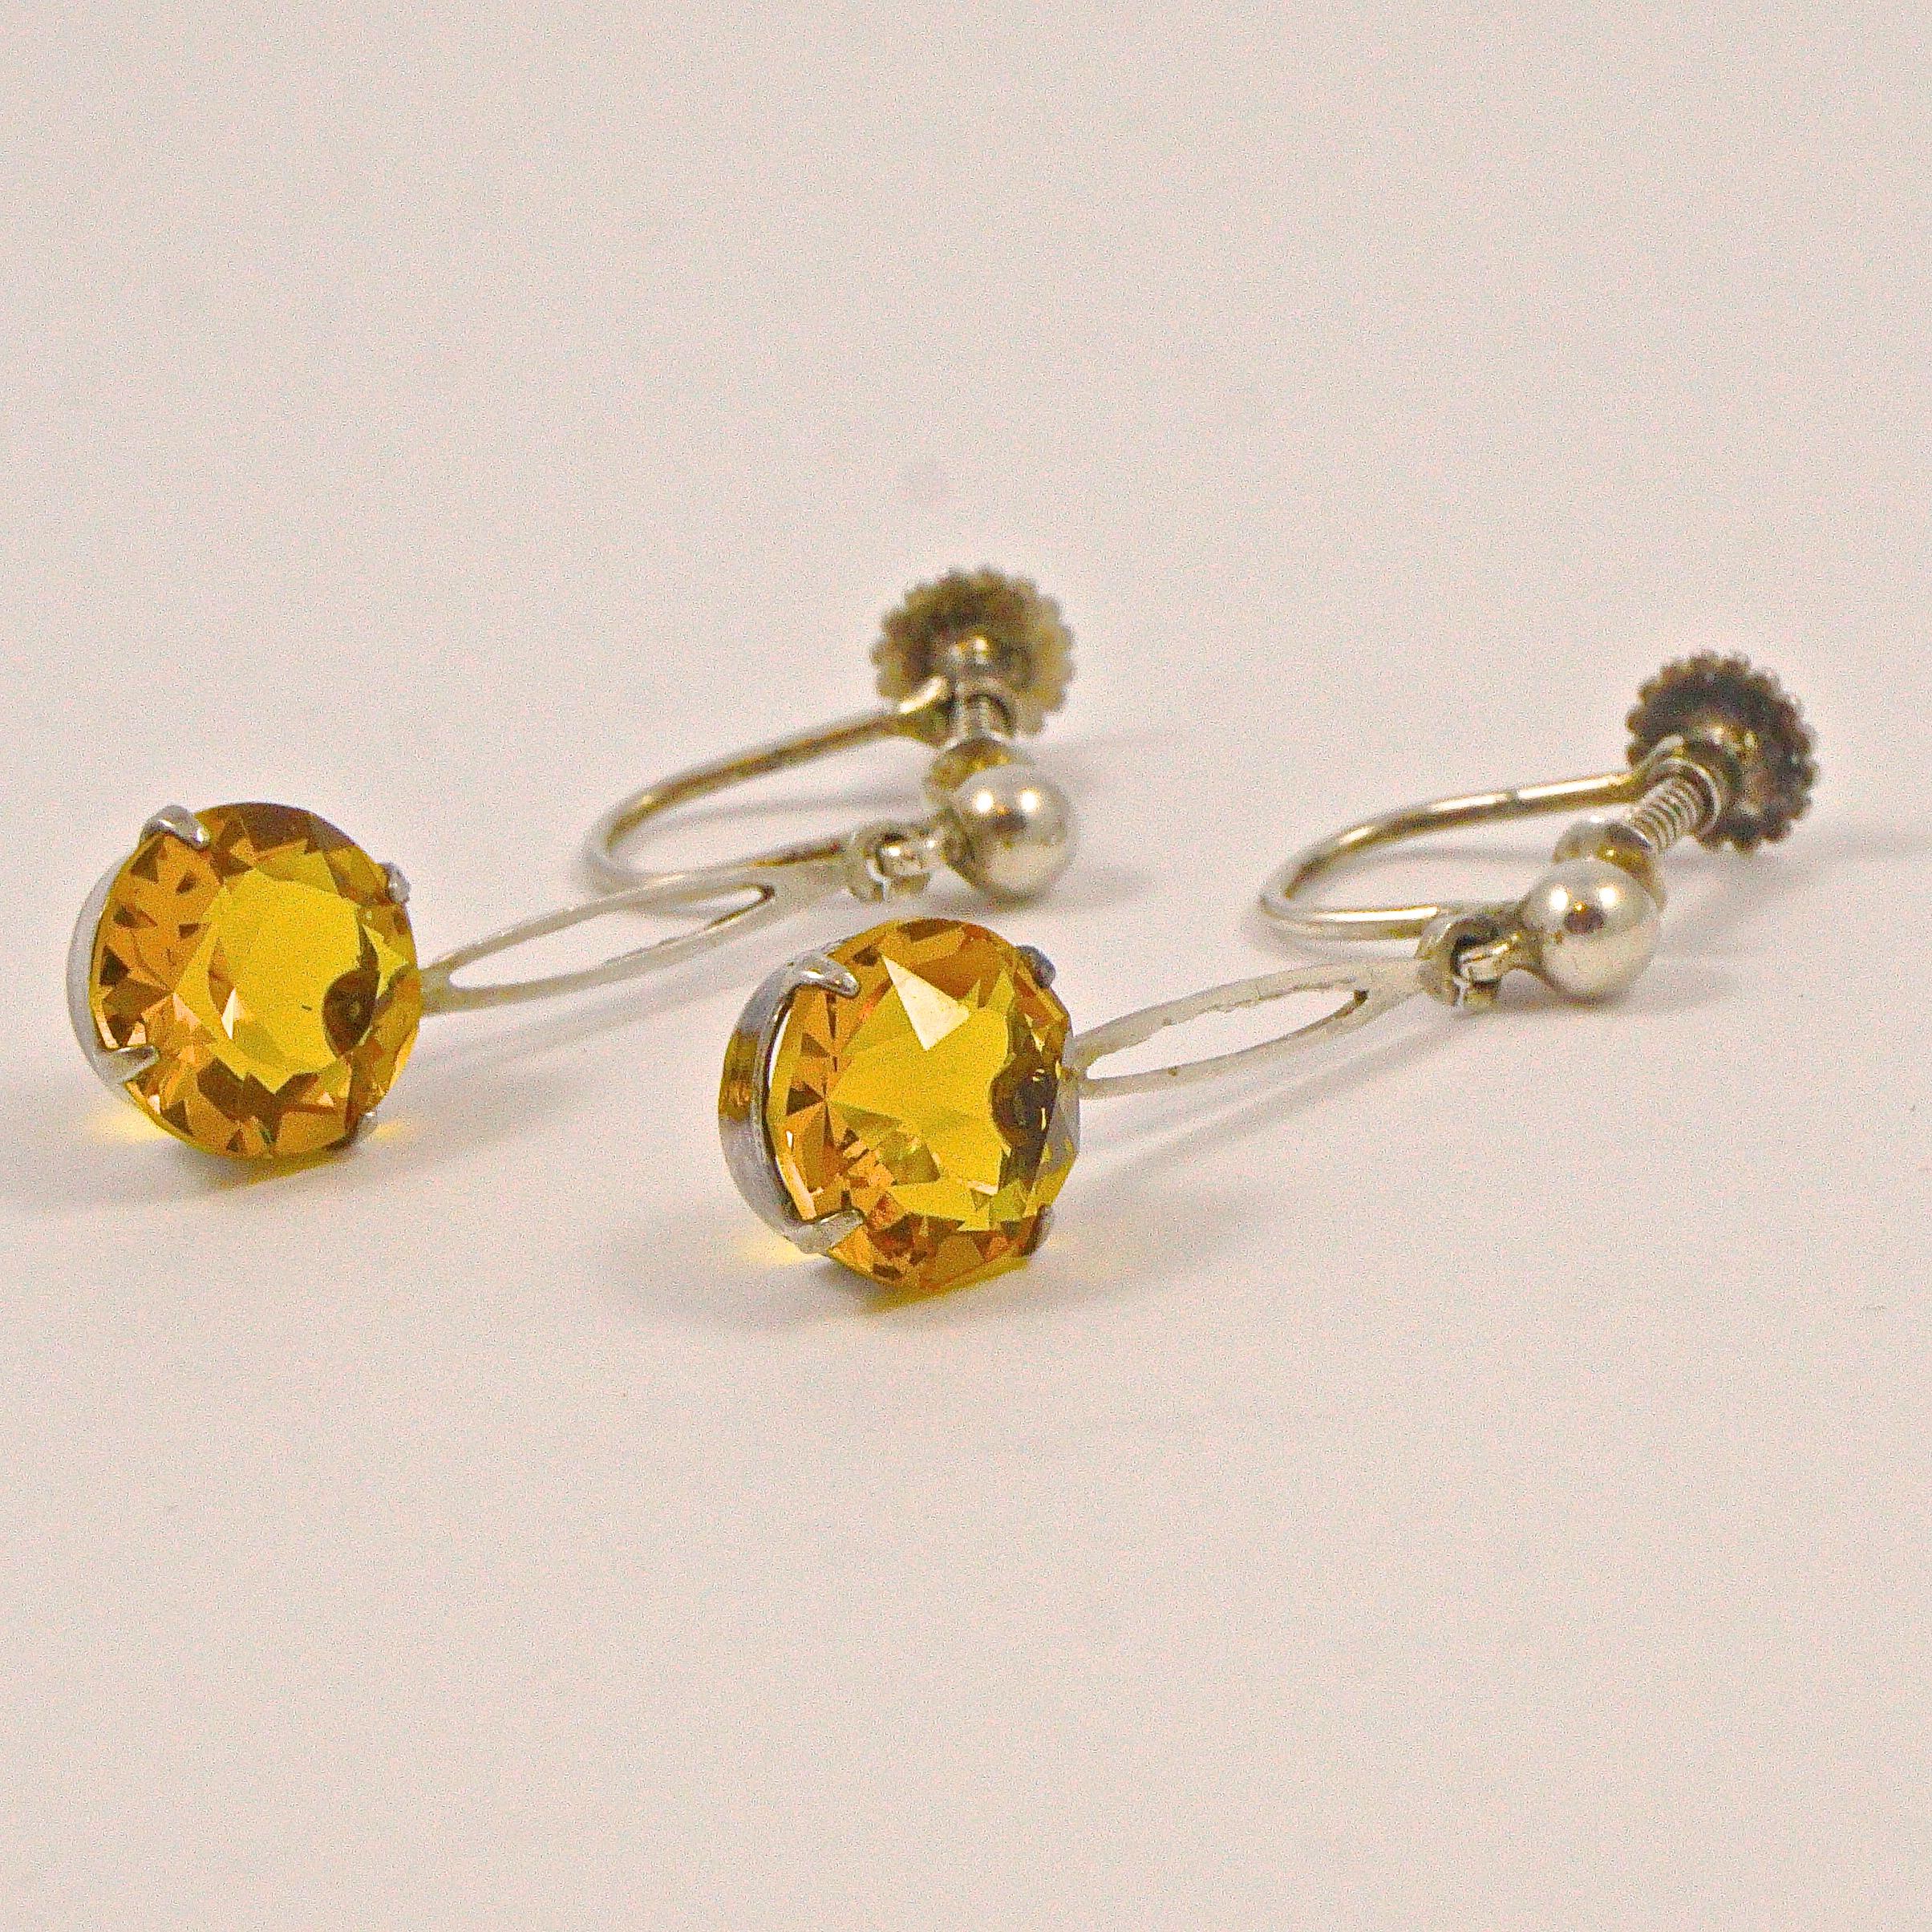 Stylish Art Deco sterling silver earrings set with faux citrine faceted glass drops, and screw back fittings. Measuring length 2.8cm / 1.1 inches, and the drops are diameter 8mm / .31 inch. The lovely sparkling faux citrines are open back to catch